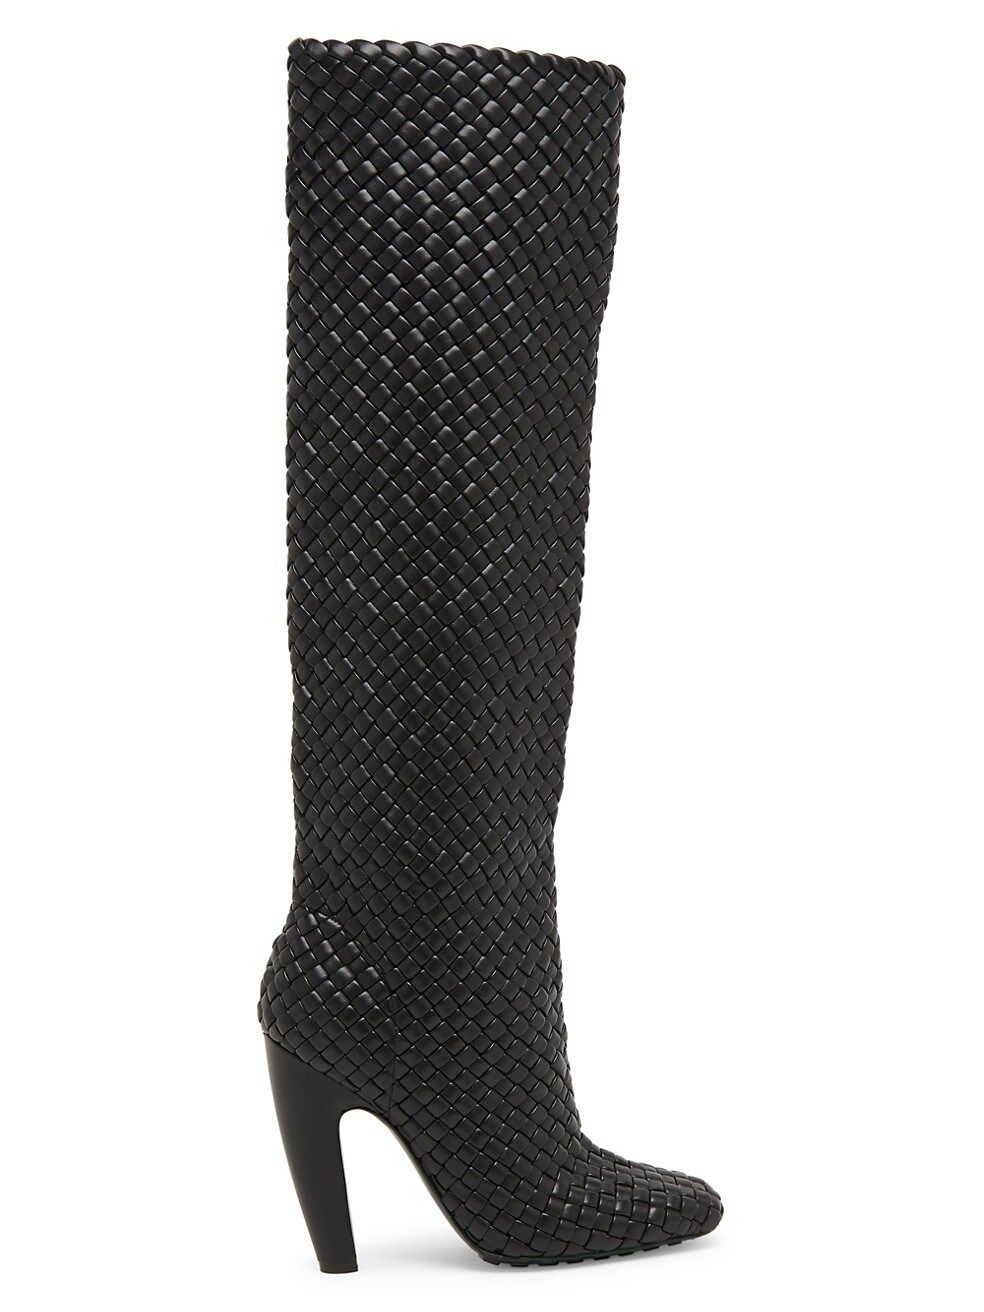 Intrecciato Leather Tall Boots | Saks Fifth Avenue